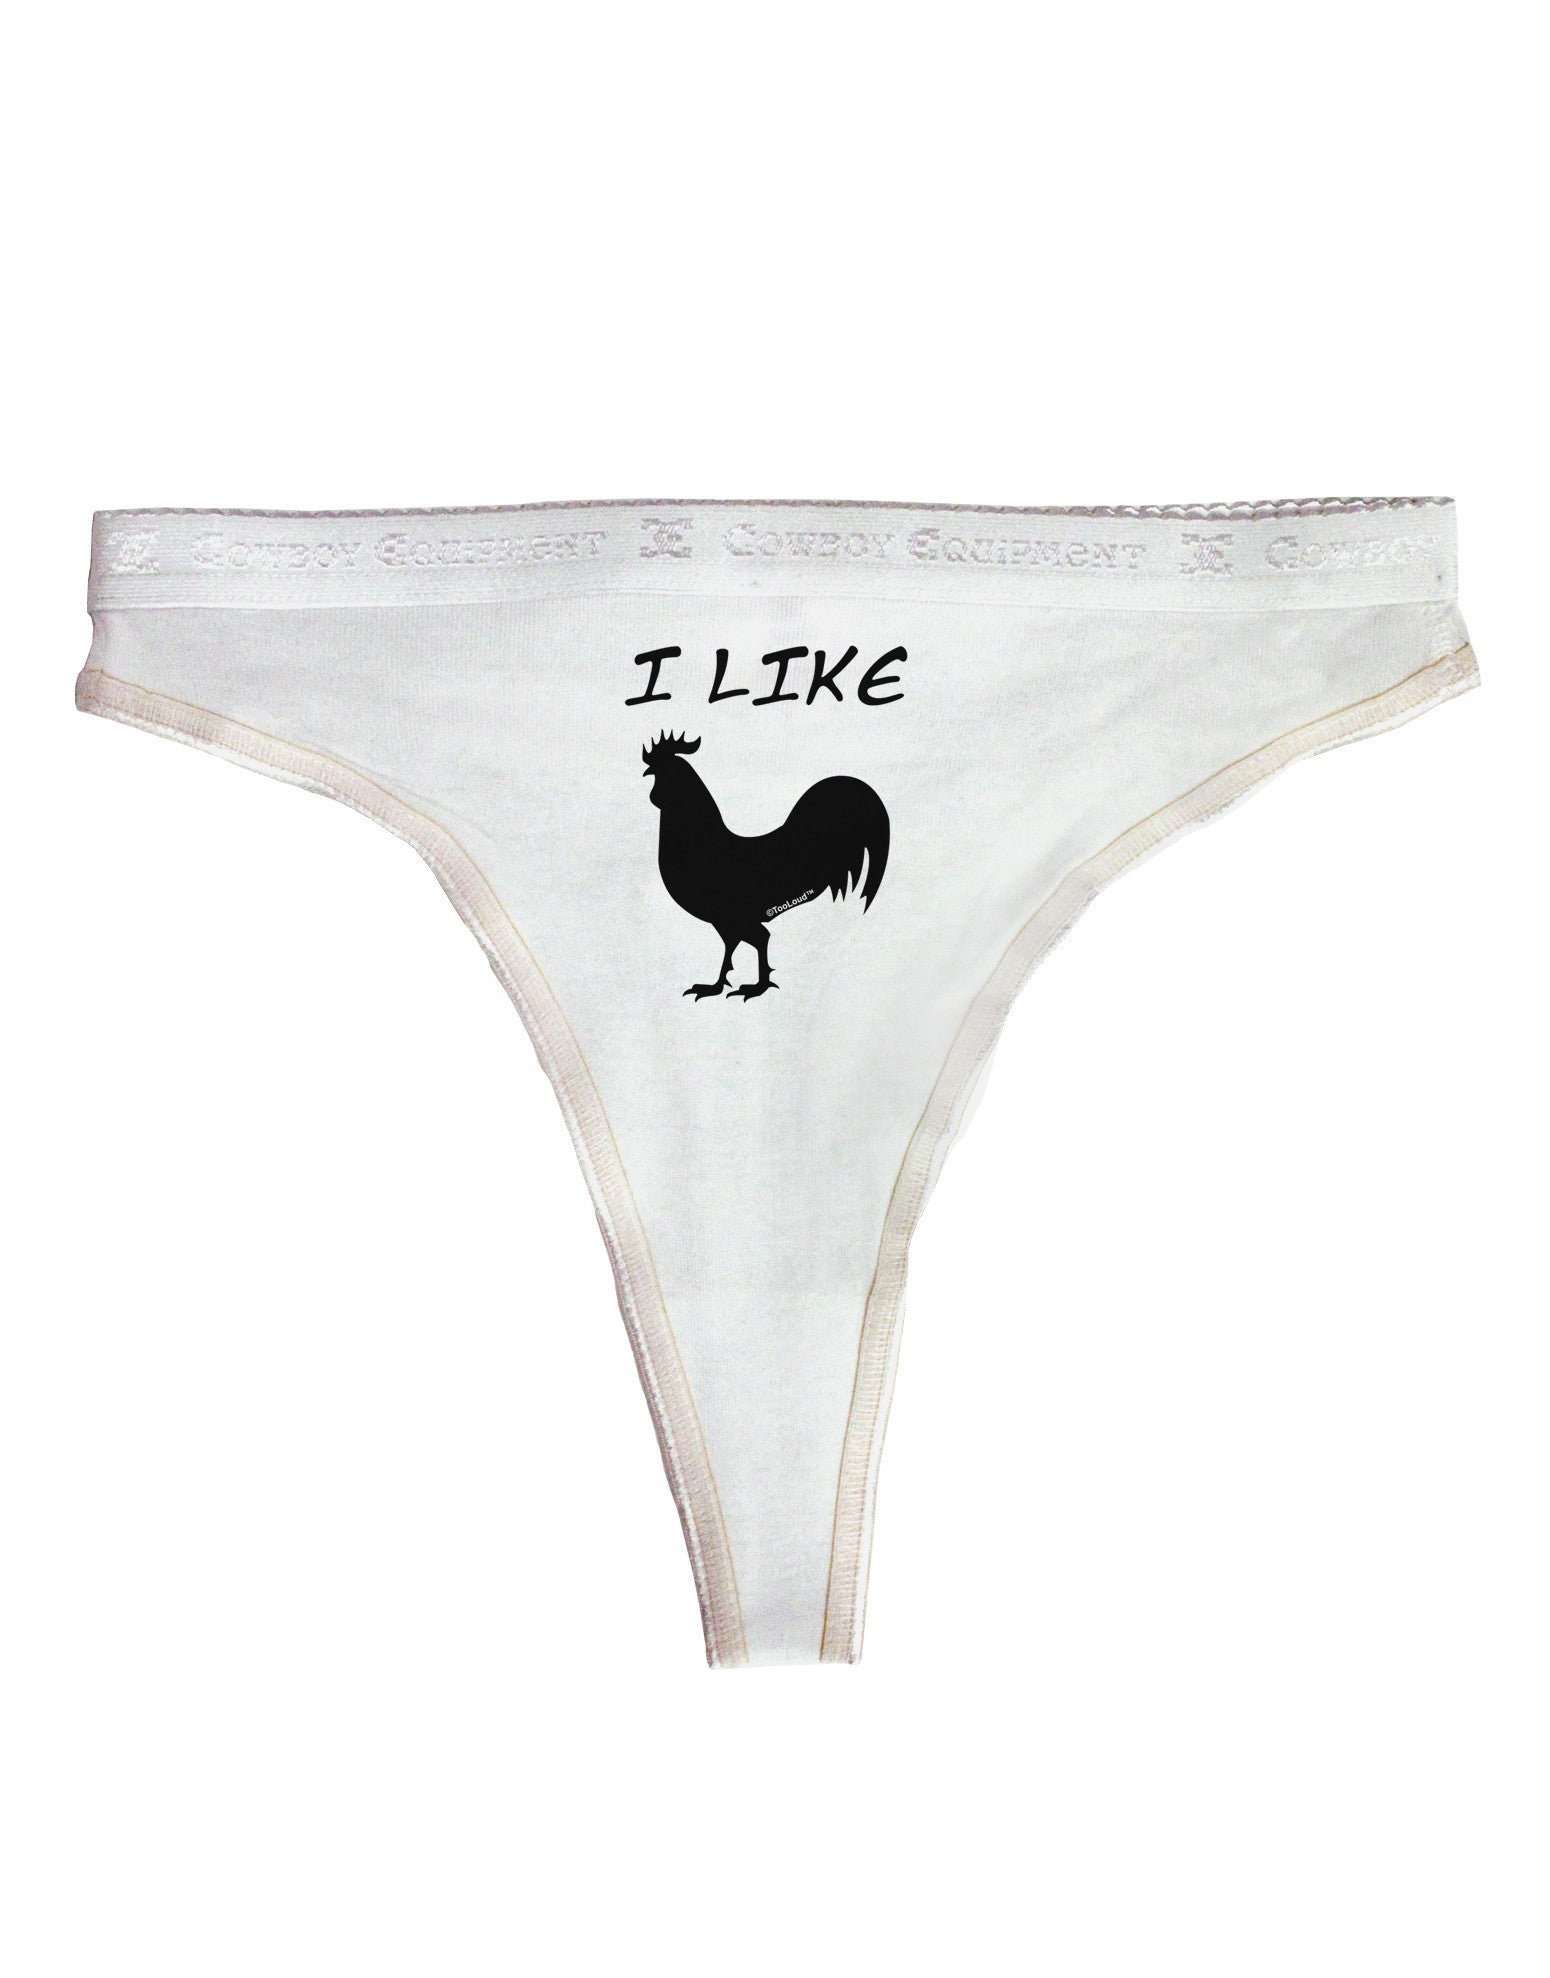 I Like Rooster Silhouette - Funny Womens Thong Underwear by